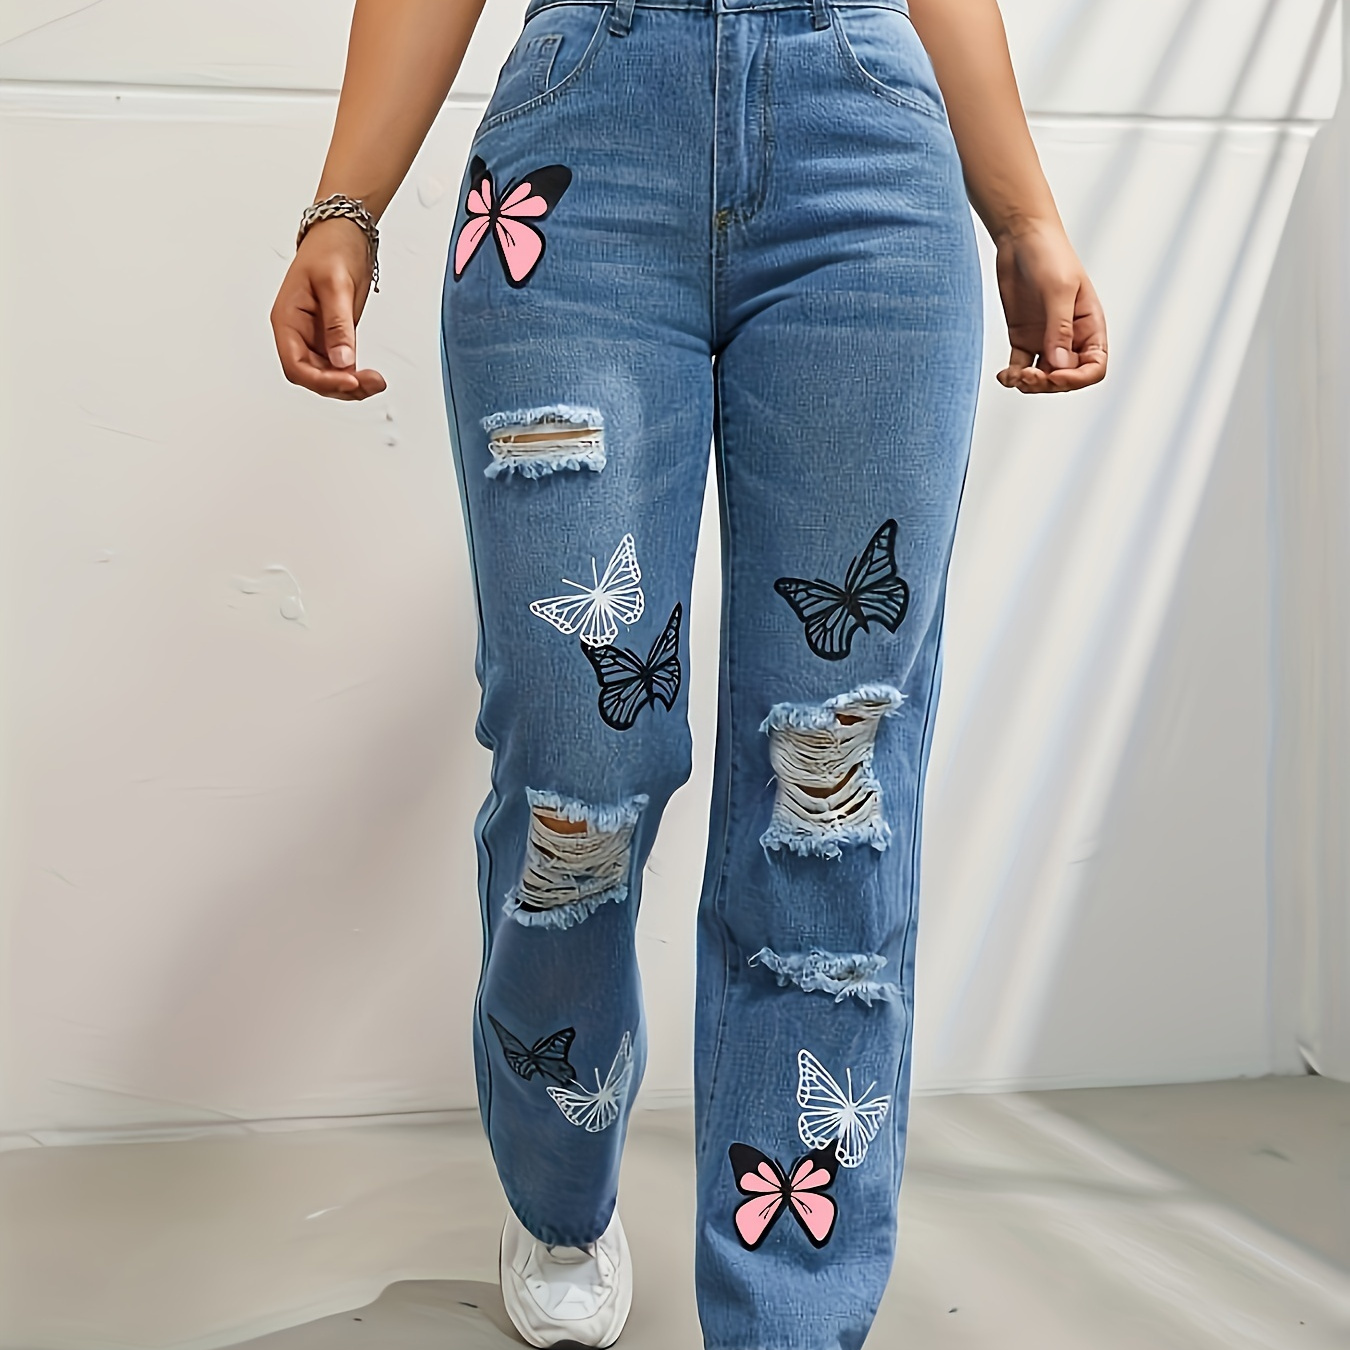 

Carnaval Butterfly Print Casual Straight Jeans, Ripped Holes High Waist Loose Fit Denim Pants, Women's Denim Jeans & Clothing